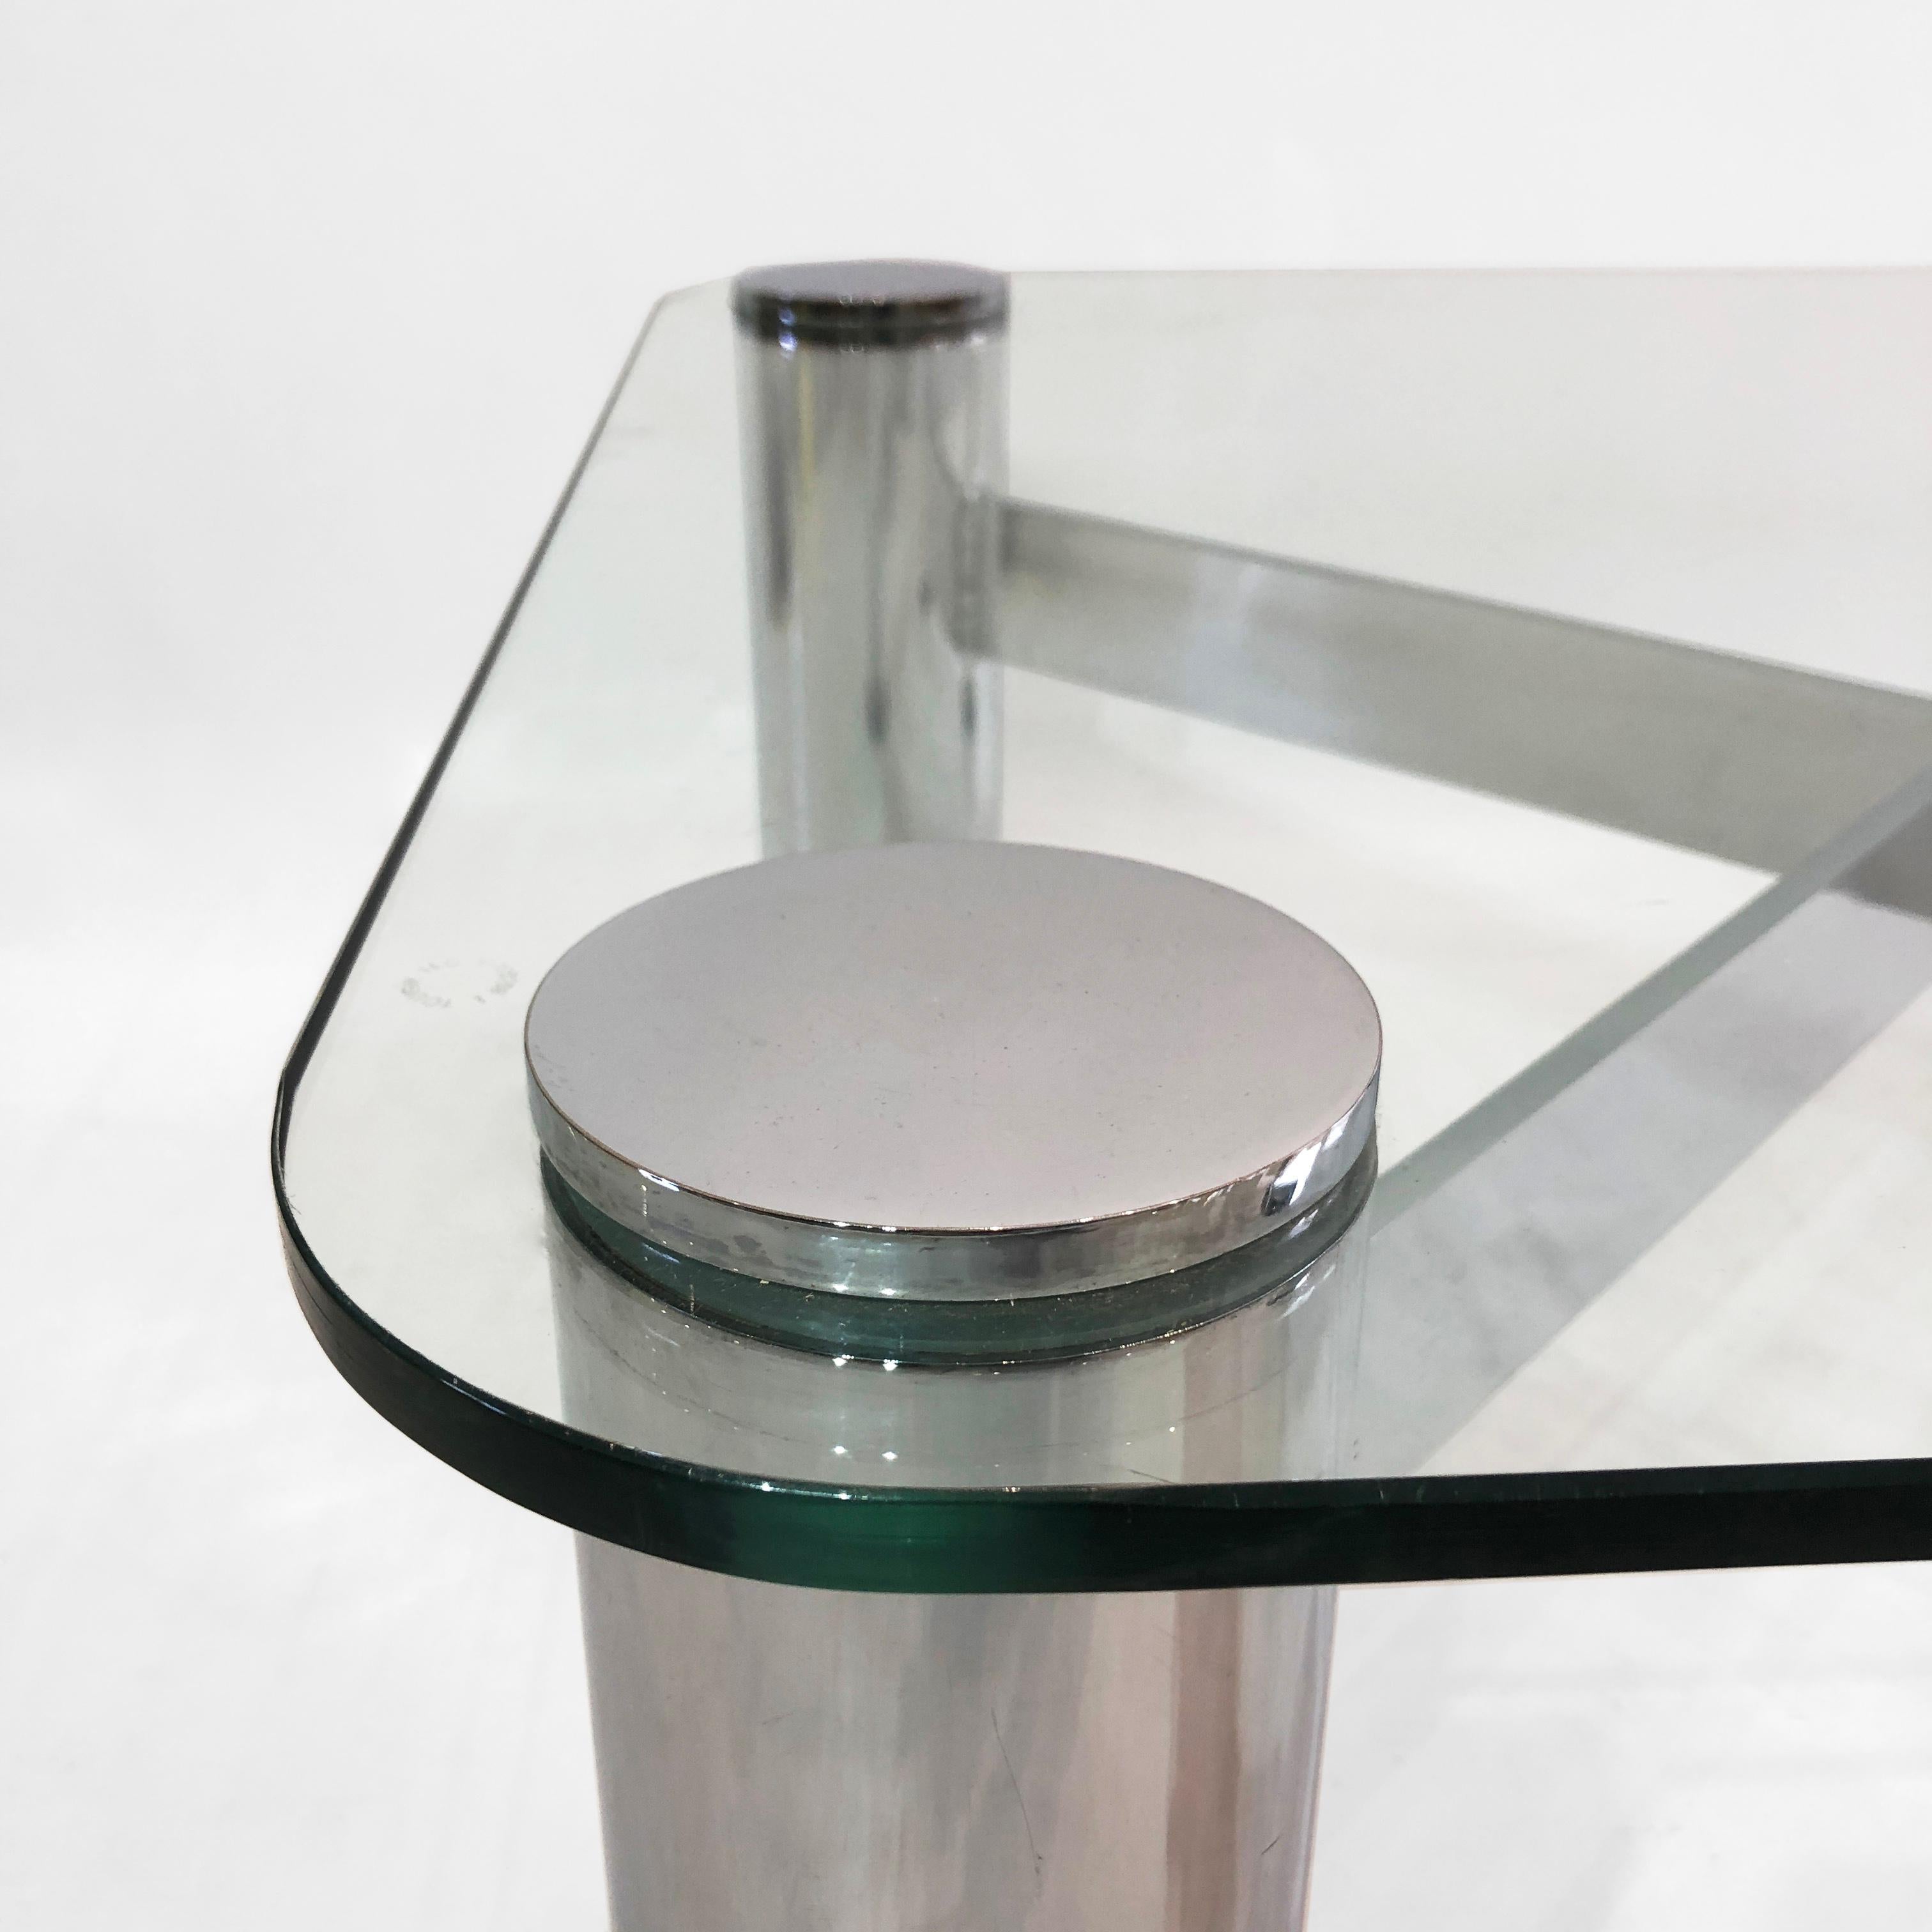 Pace Postmodern Chrome Glass Coffee Table 1970s Vintage Retro Leon Rosen Style In Good Condition For Sale In London, GB